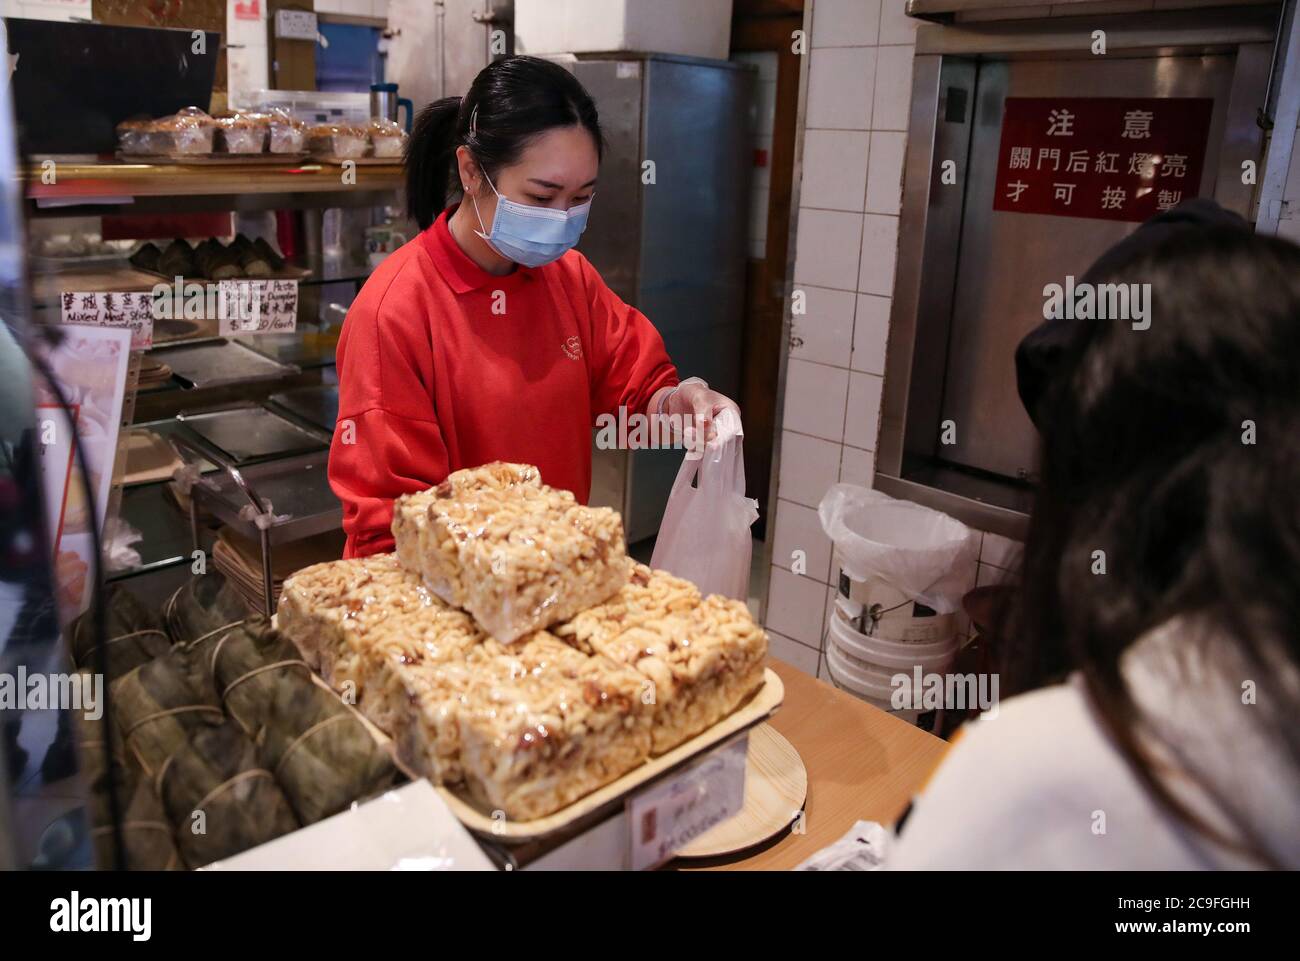 Sydney, Australia. 29th July, 2020. A customer shops at a Chinese bakery in Chinatown of Sydney, Australia, on July 29, 2020. Now, with record COVID-19 cases in the city of Melbourne and Sydney being potentially on the brink of a second wave, restaurants and bars are preparing to be hit with a return to lockdown as they struggle to survive. TO GO WITH 'Feature: Sydney's iconic Chinatown eateries adapt to life under COVID-19' Credit: Bai Xuefei/Xinhua/Alamy Live News Stock Photo